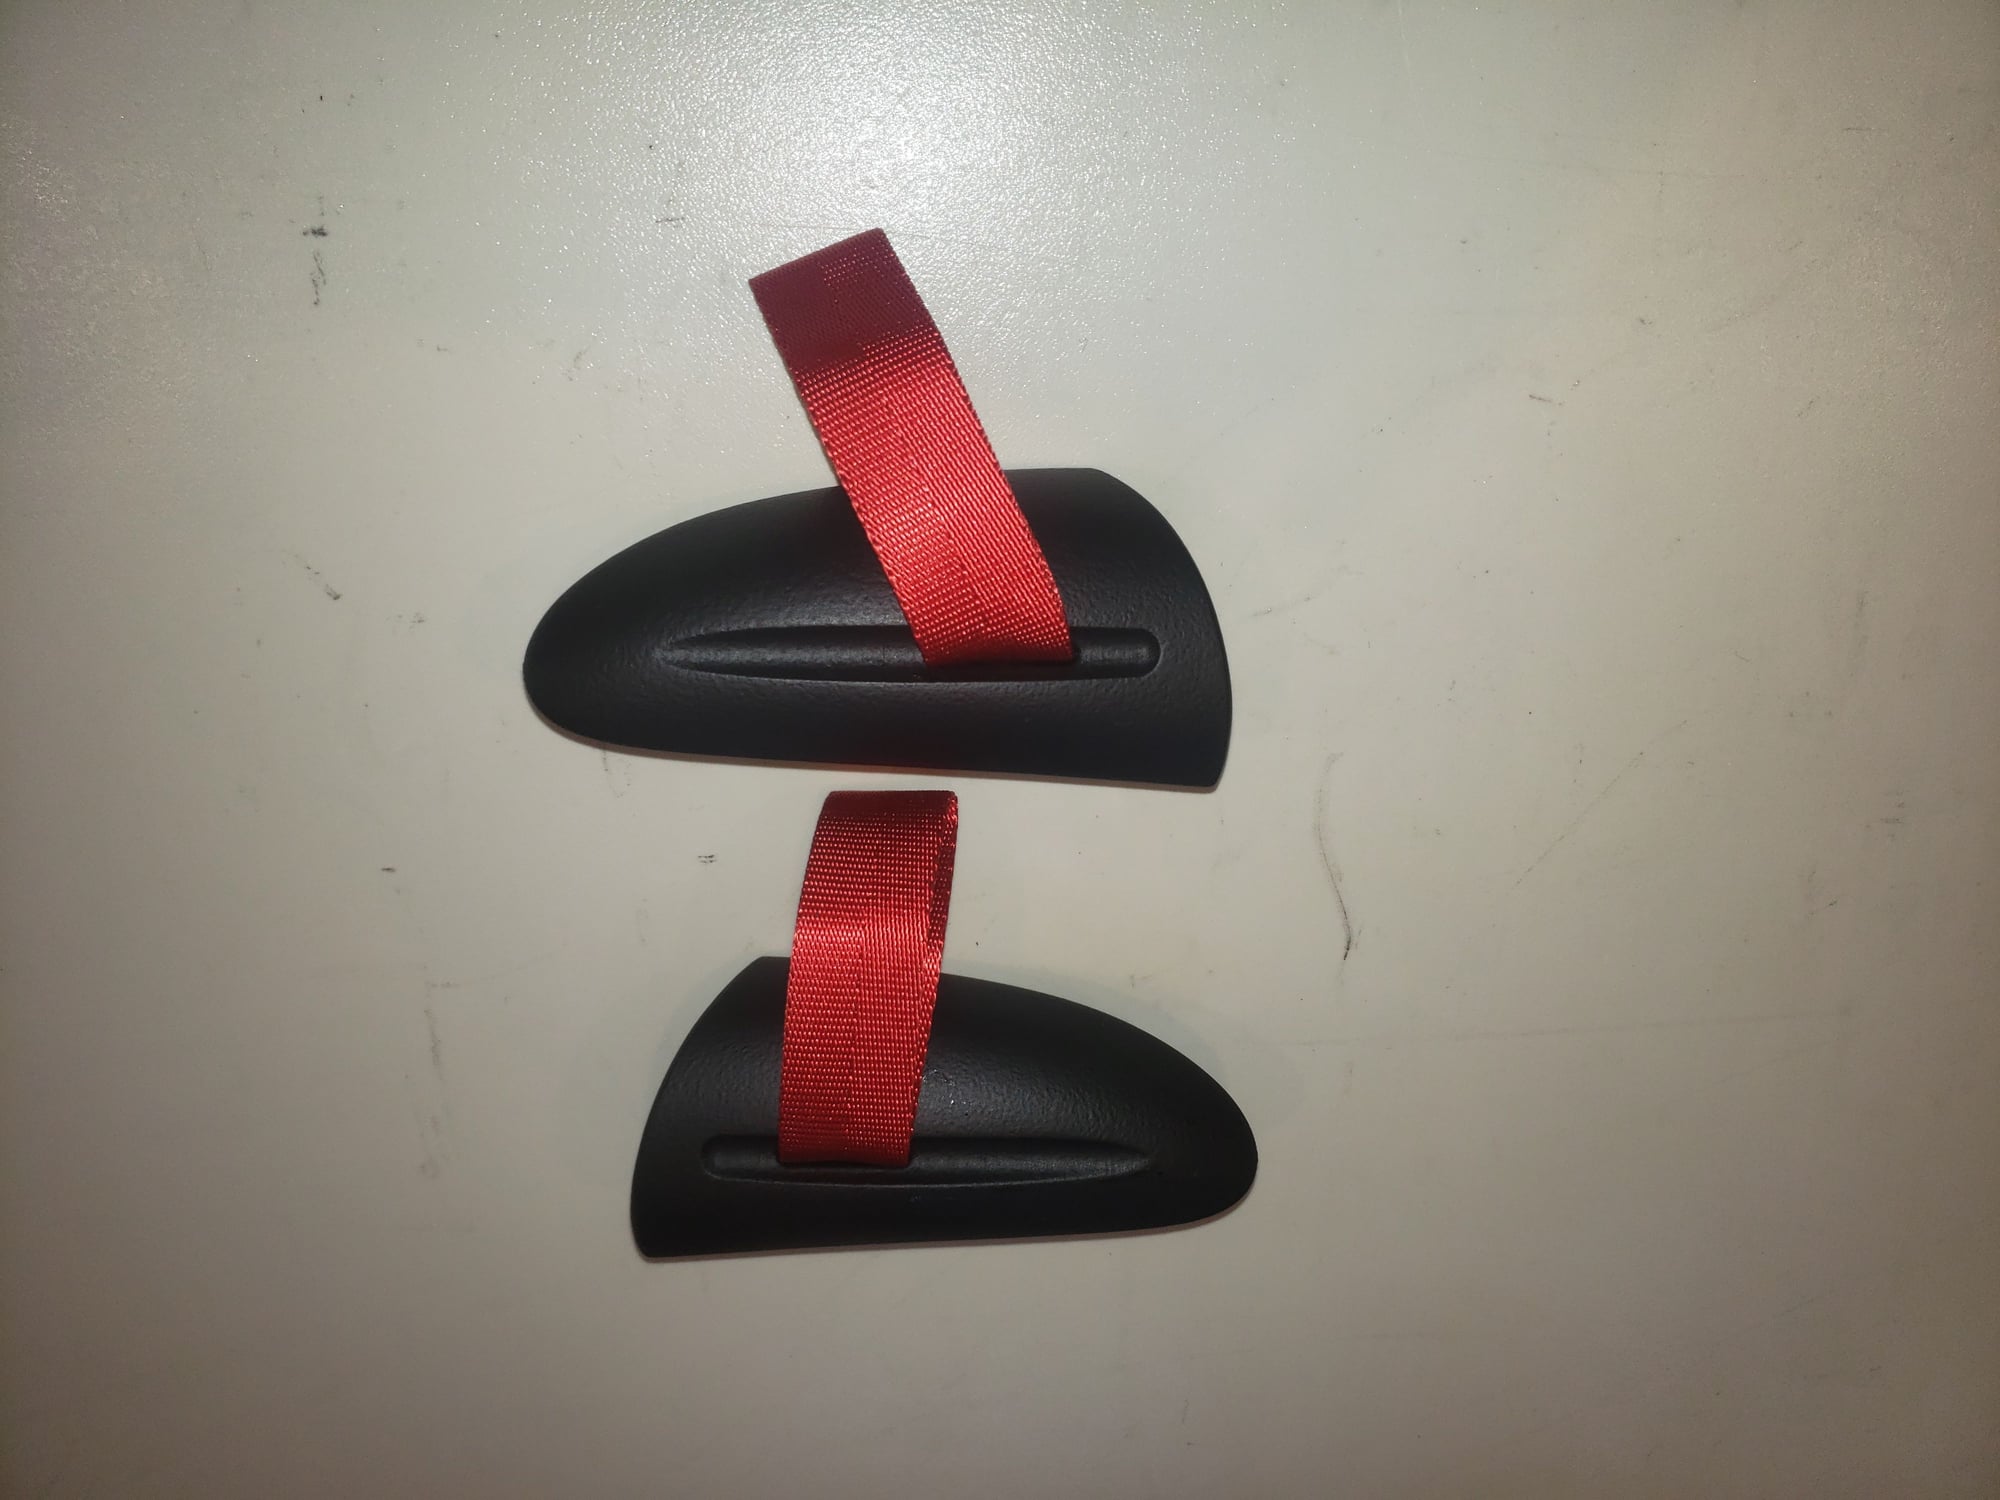 Interior/Upholstery - GT3RS-Style Door Pulls - Used - 2005 to 2011 Porsche 911 - Richmond, VA 23060, United States